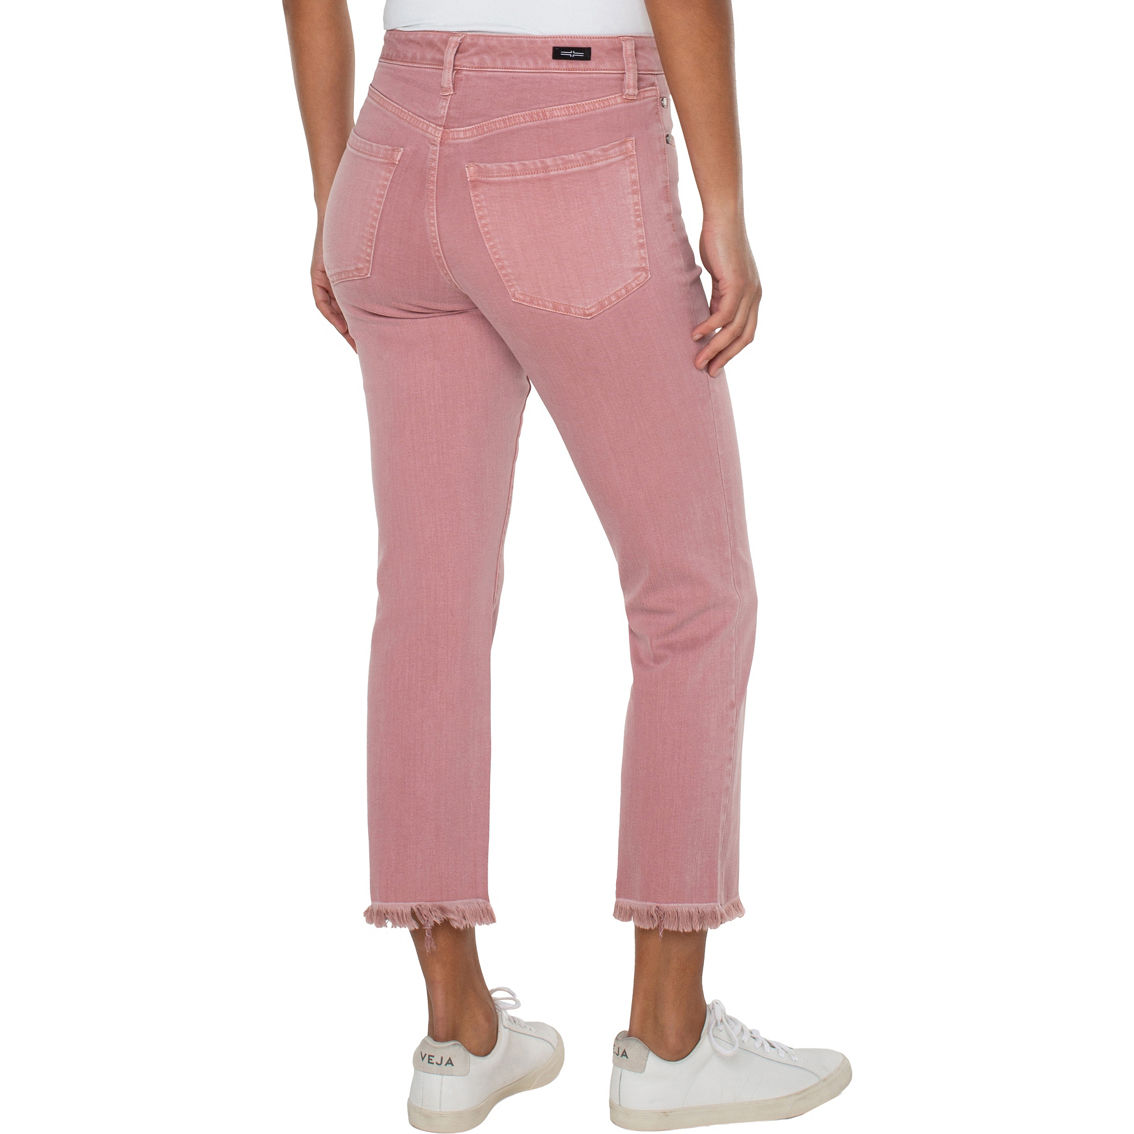 Liverpool Kennedy Cropped Jeans - Image 2 of 5